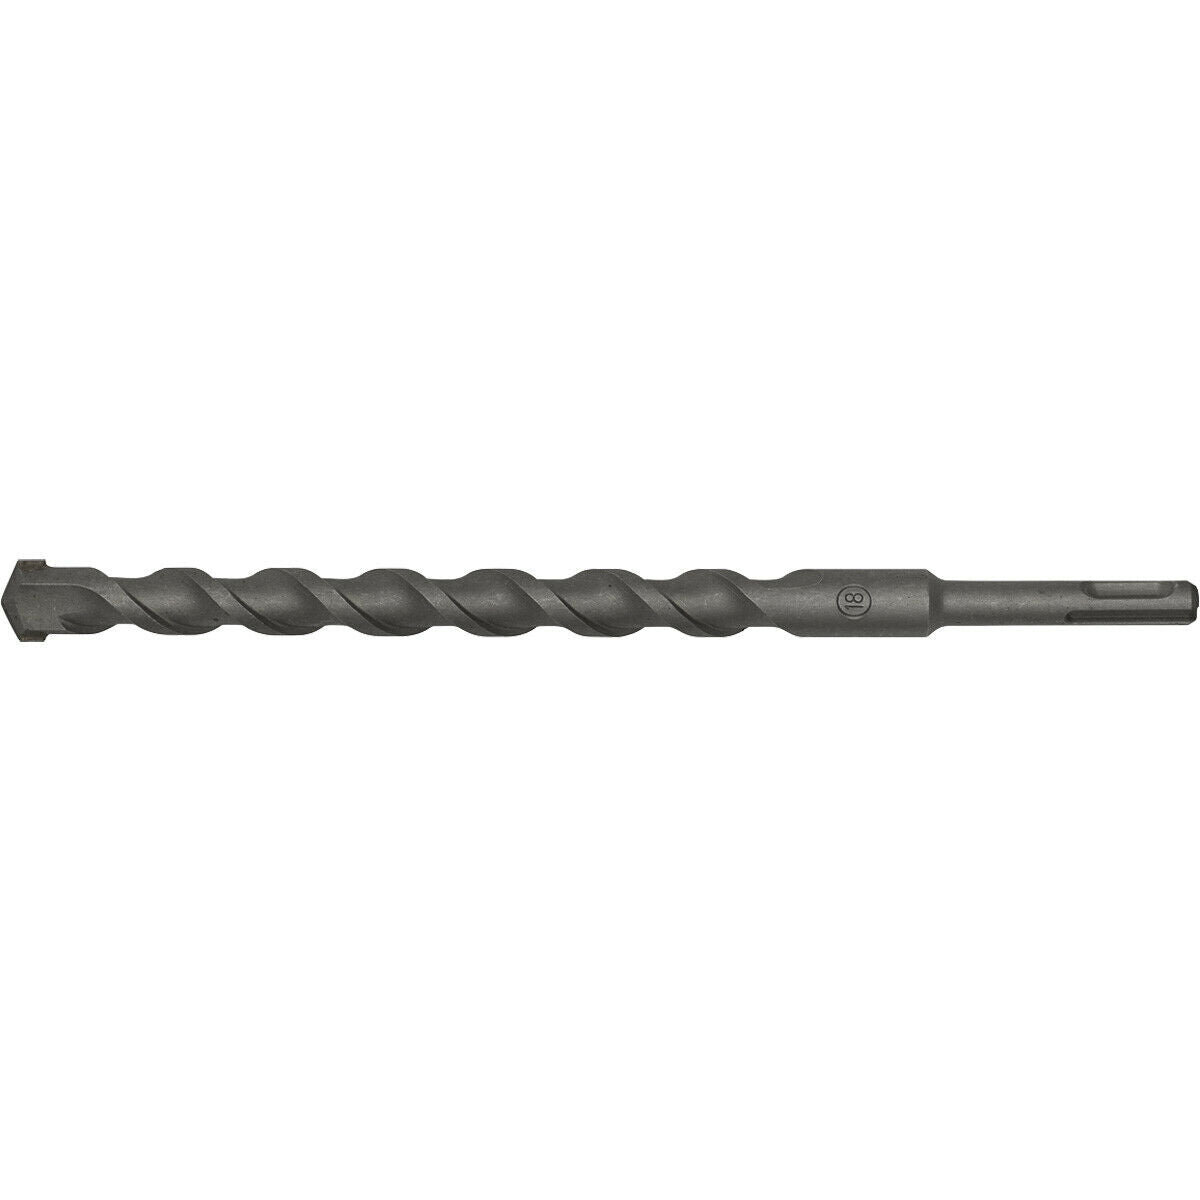 18 x 250mm SDS Plus Drill Bit - Fully Hardened & Ground - Smooth Drilling